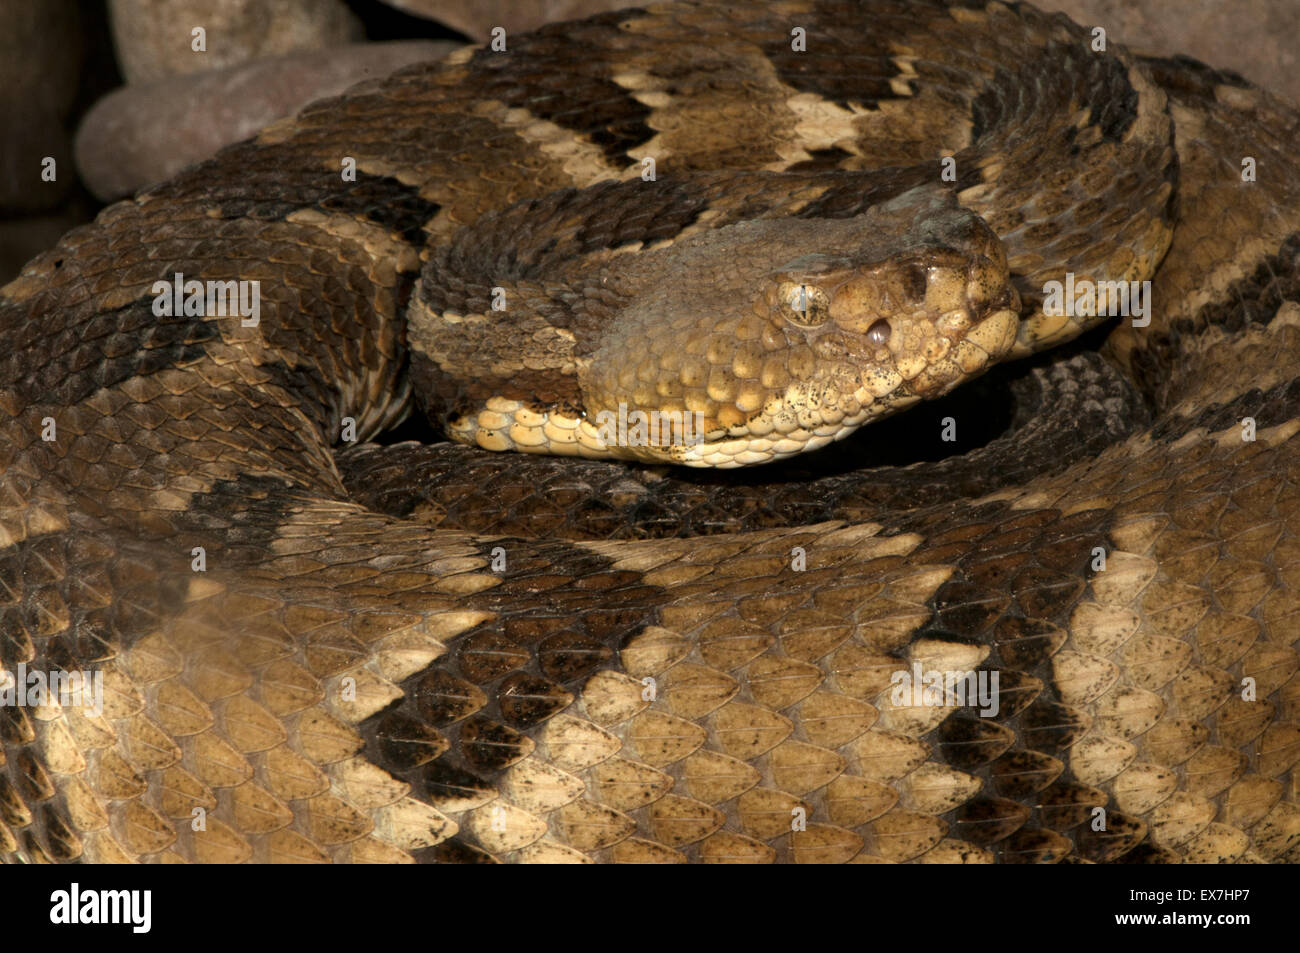 Crotalus horridus, commonly known as timber rattlesnake. Stock Photo